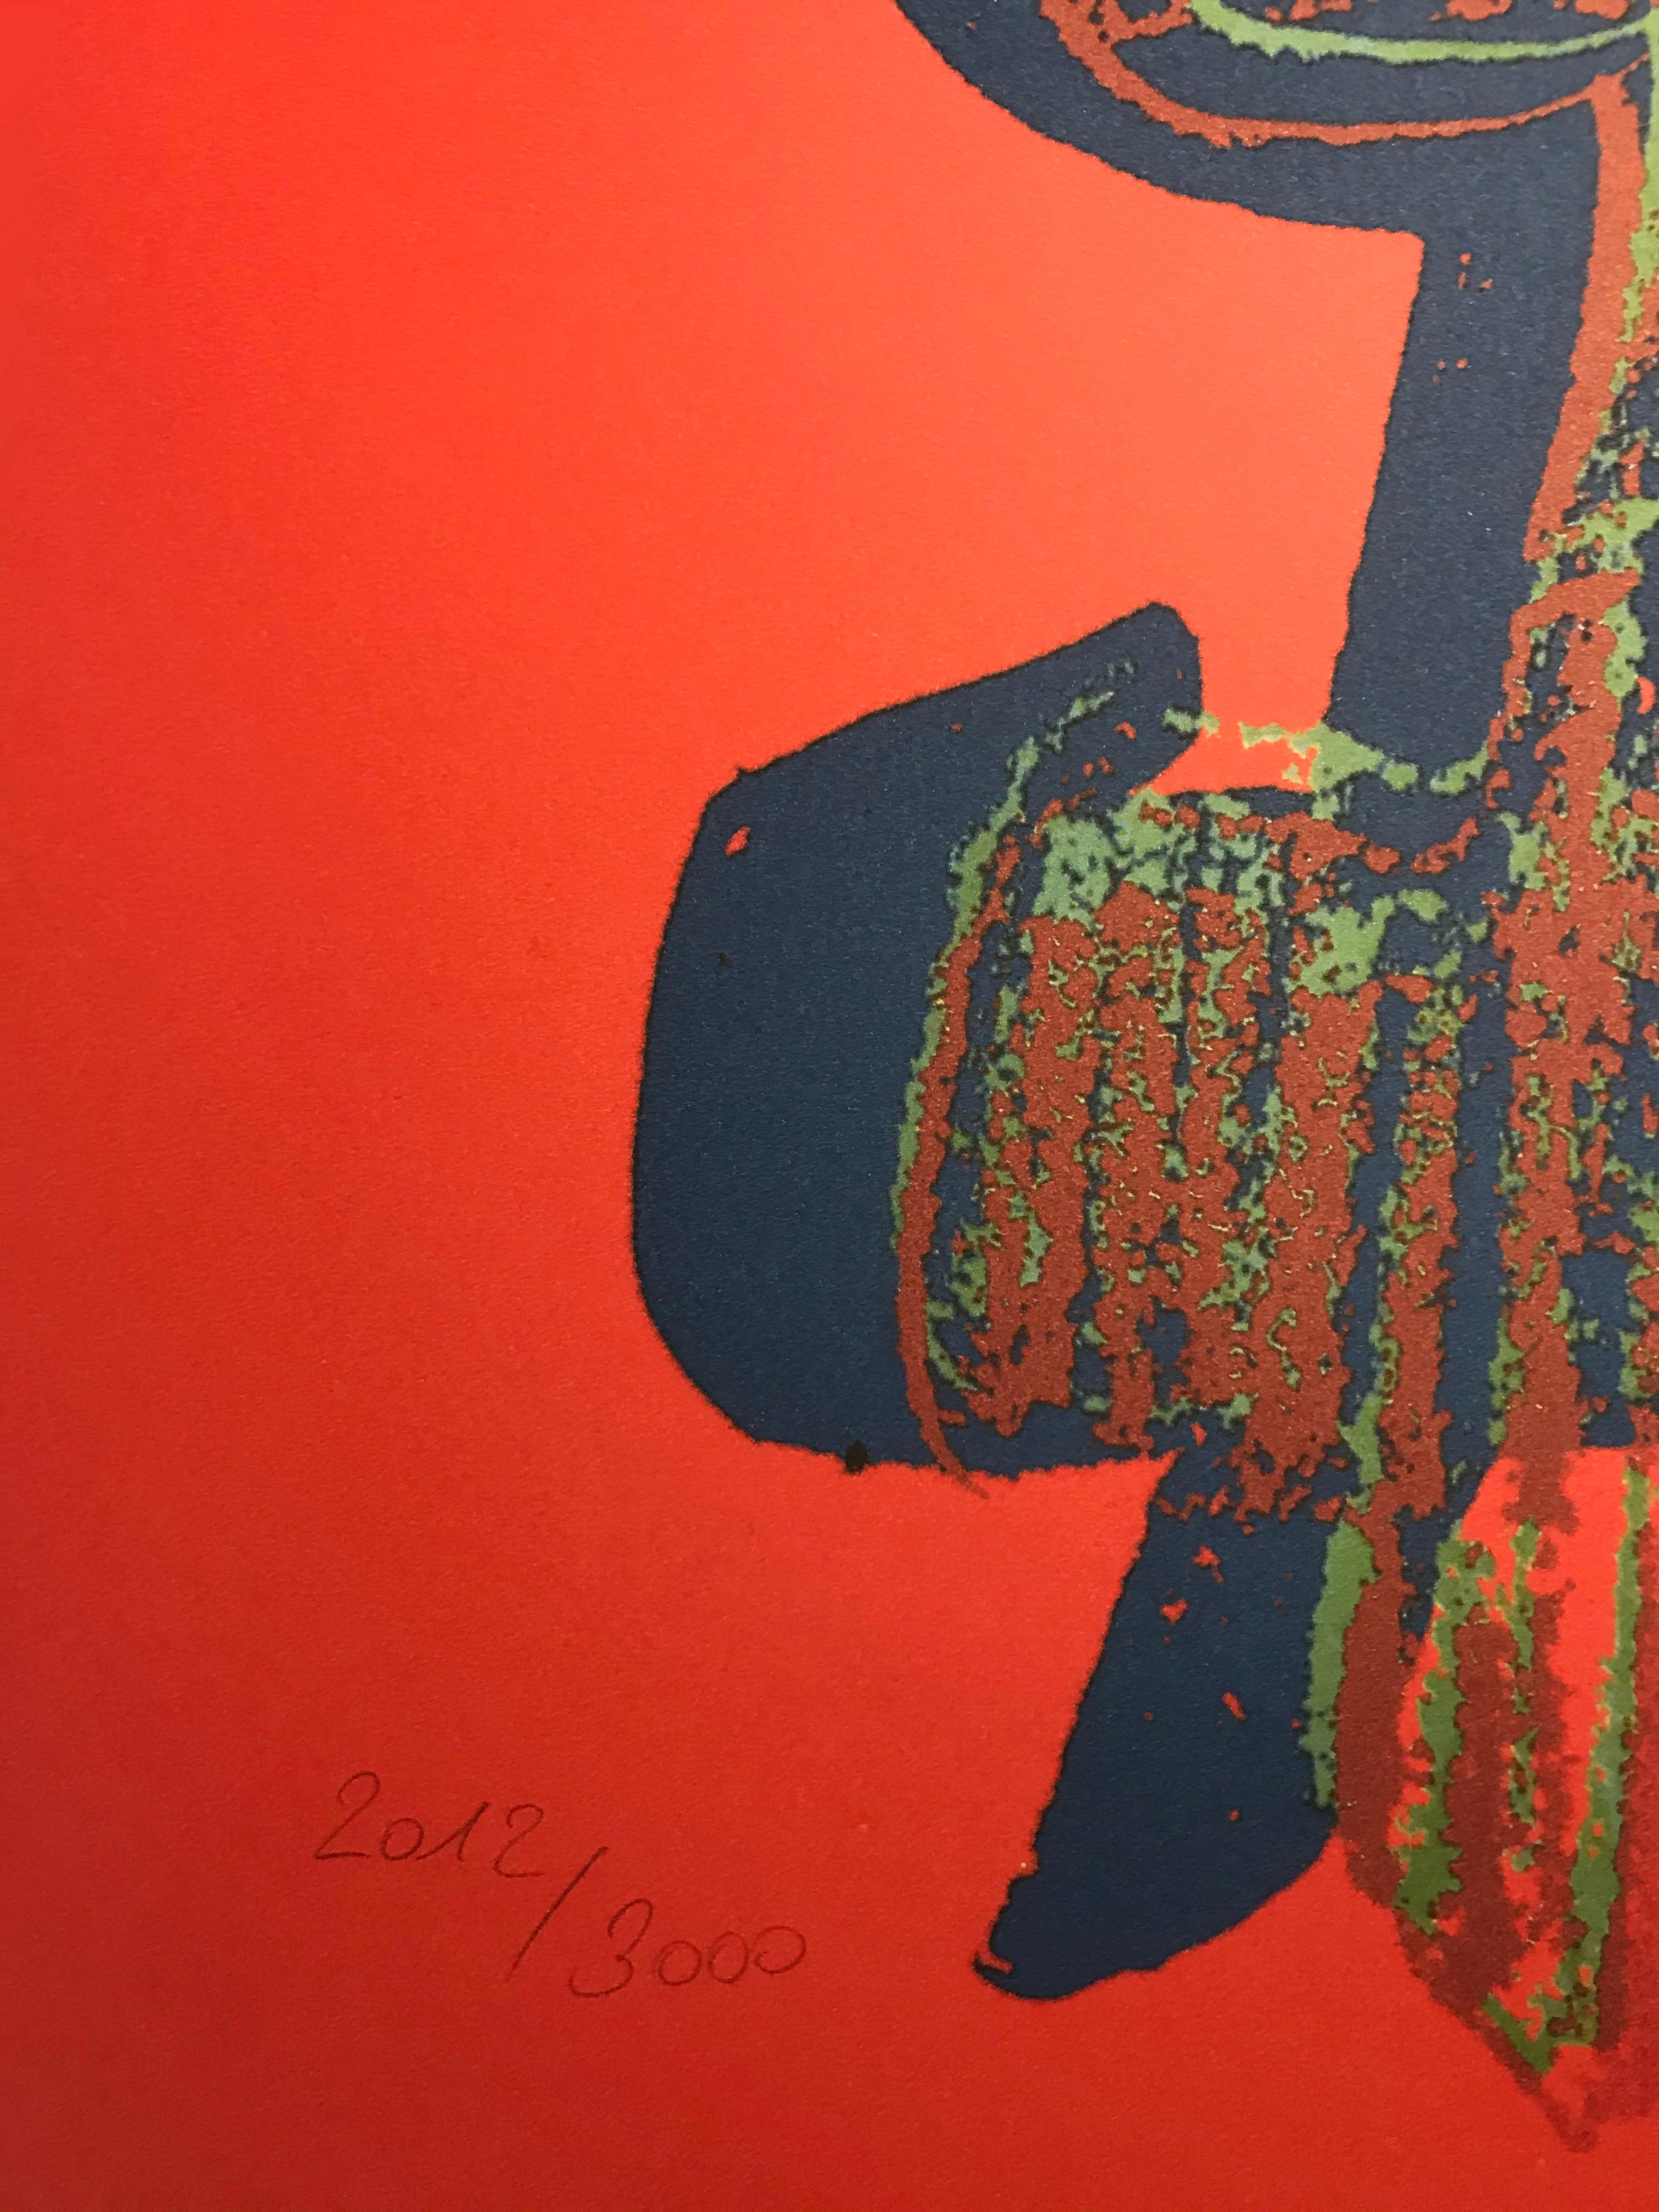 Granolithography Dollar sign in red Andy warhol 1986 2